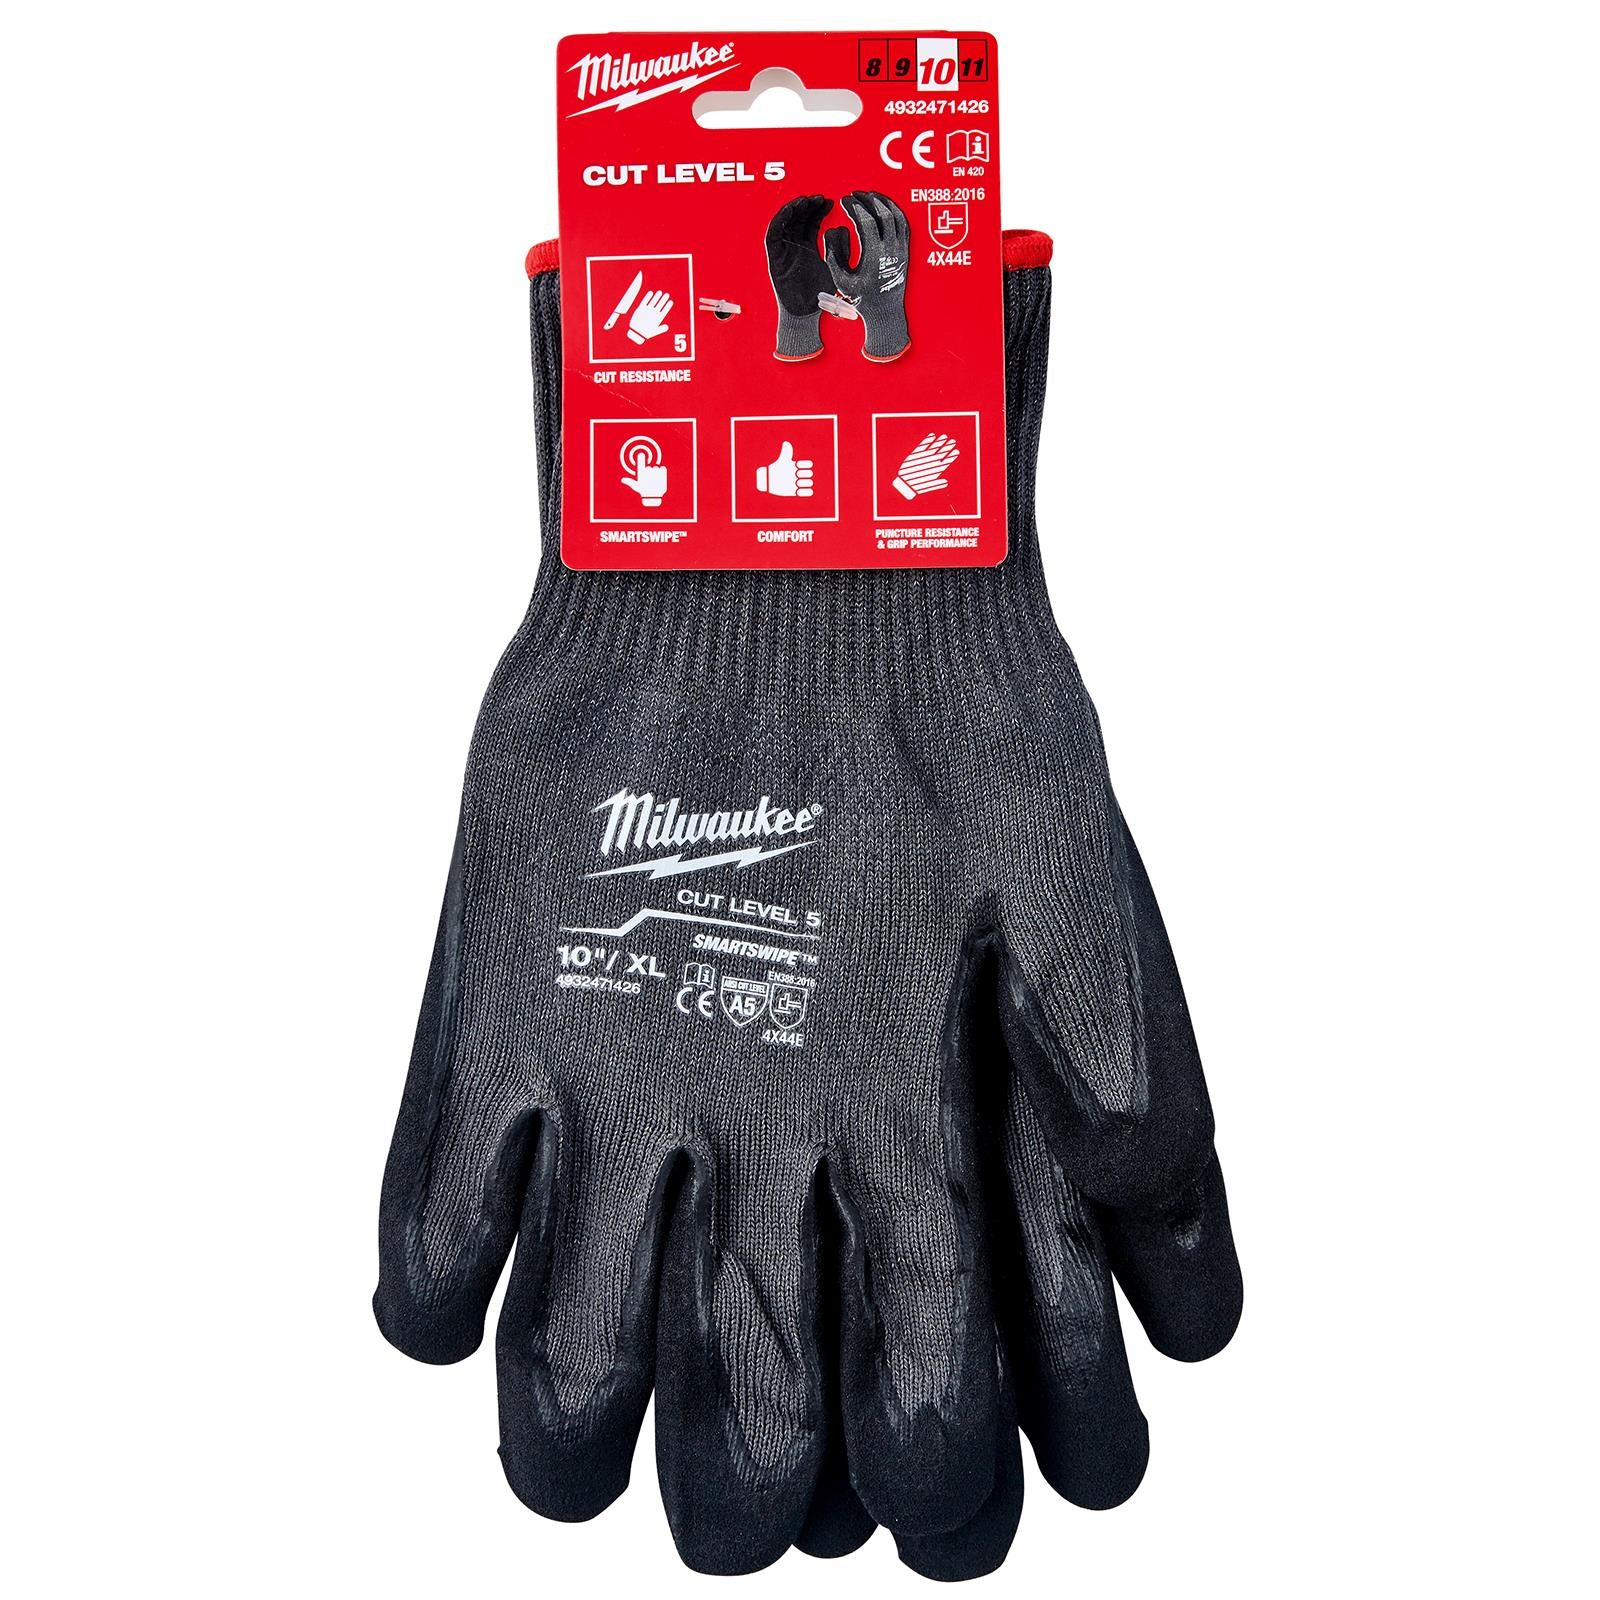 Milwaukee Safety Gloves Cut Level 5/E Dipped Glove Size 10 / XL Extra Large